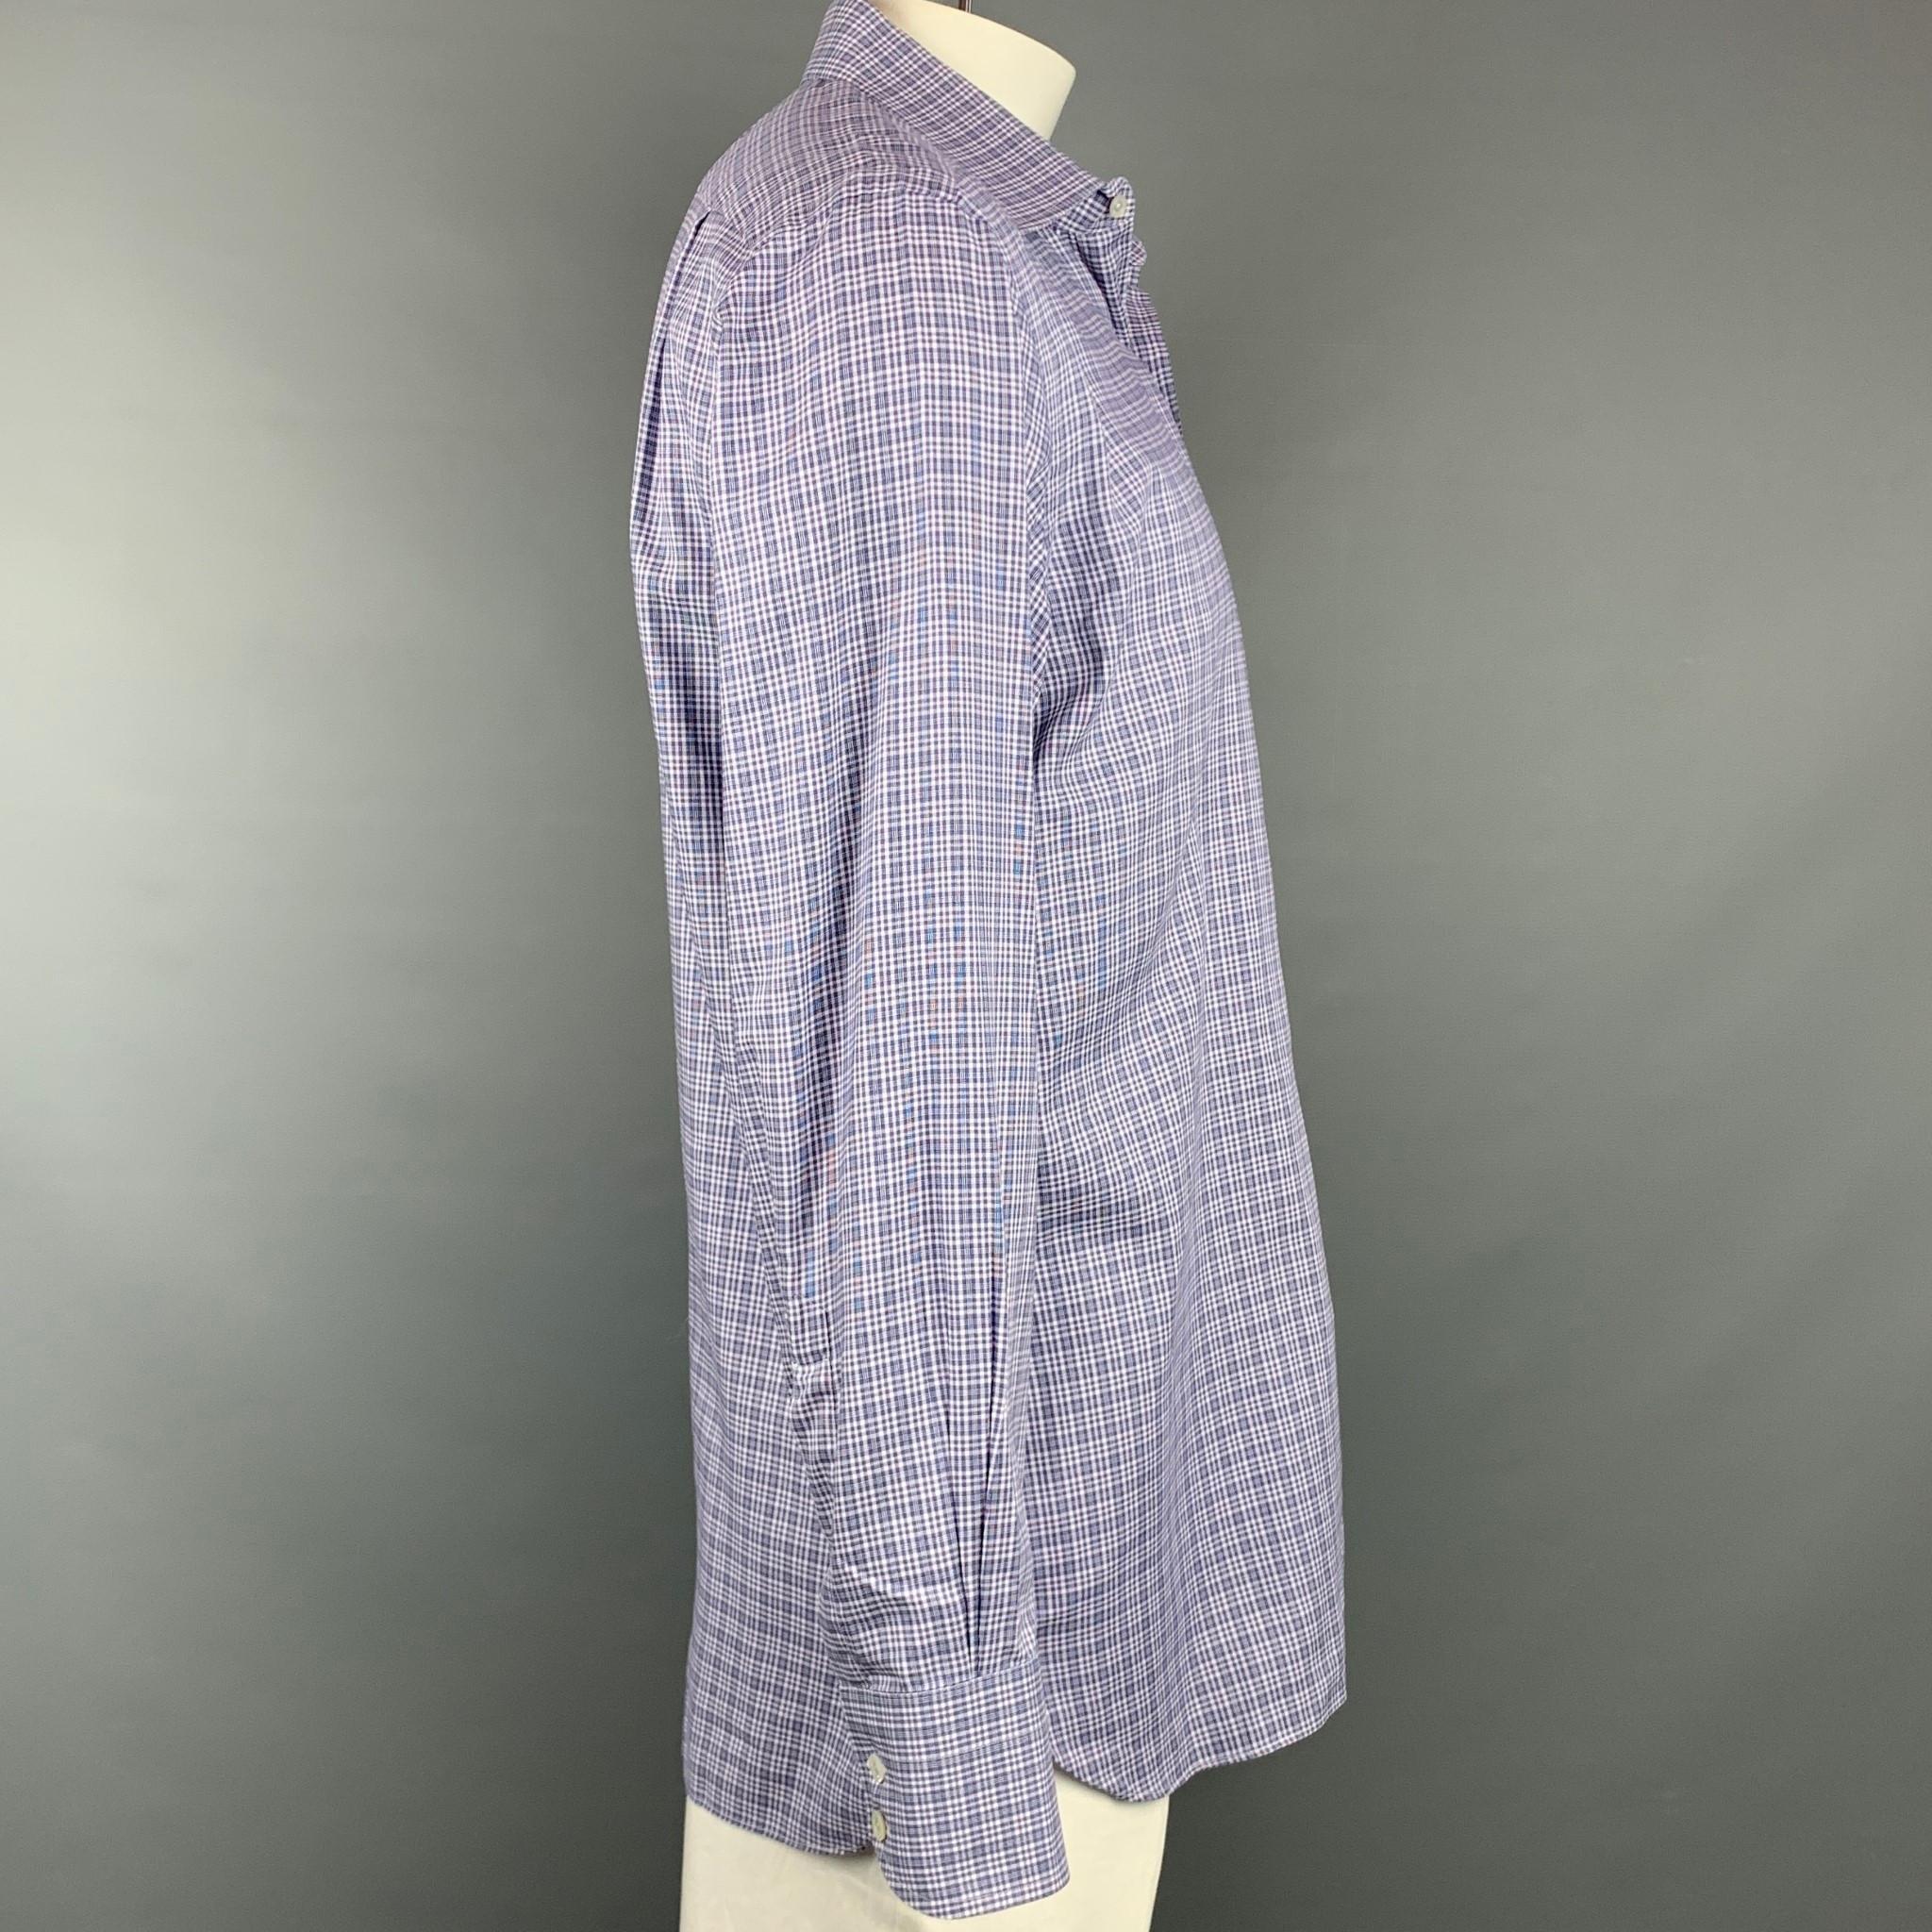 TOM FORD long sleeve shirt comes in a navy & white plaid cotton featuring a button up style and a spread collar. Made in Italy.

Very Good Pre-Owned Condition.
Marked: 43/17

Measurements:

Shoulder: 19 in.
Chest: 46 in.
Sleeve: 26.5 in.
Length: 32